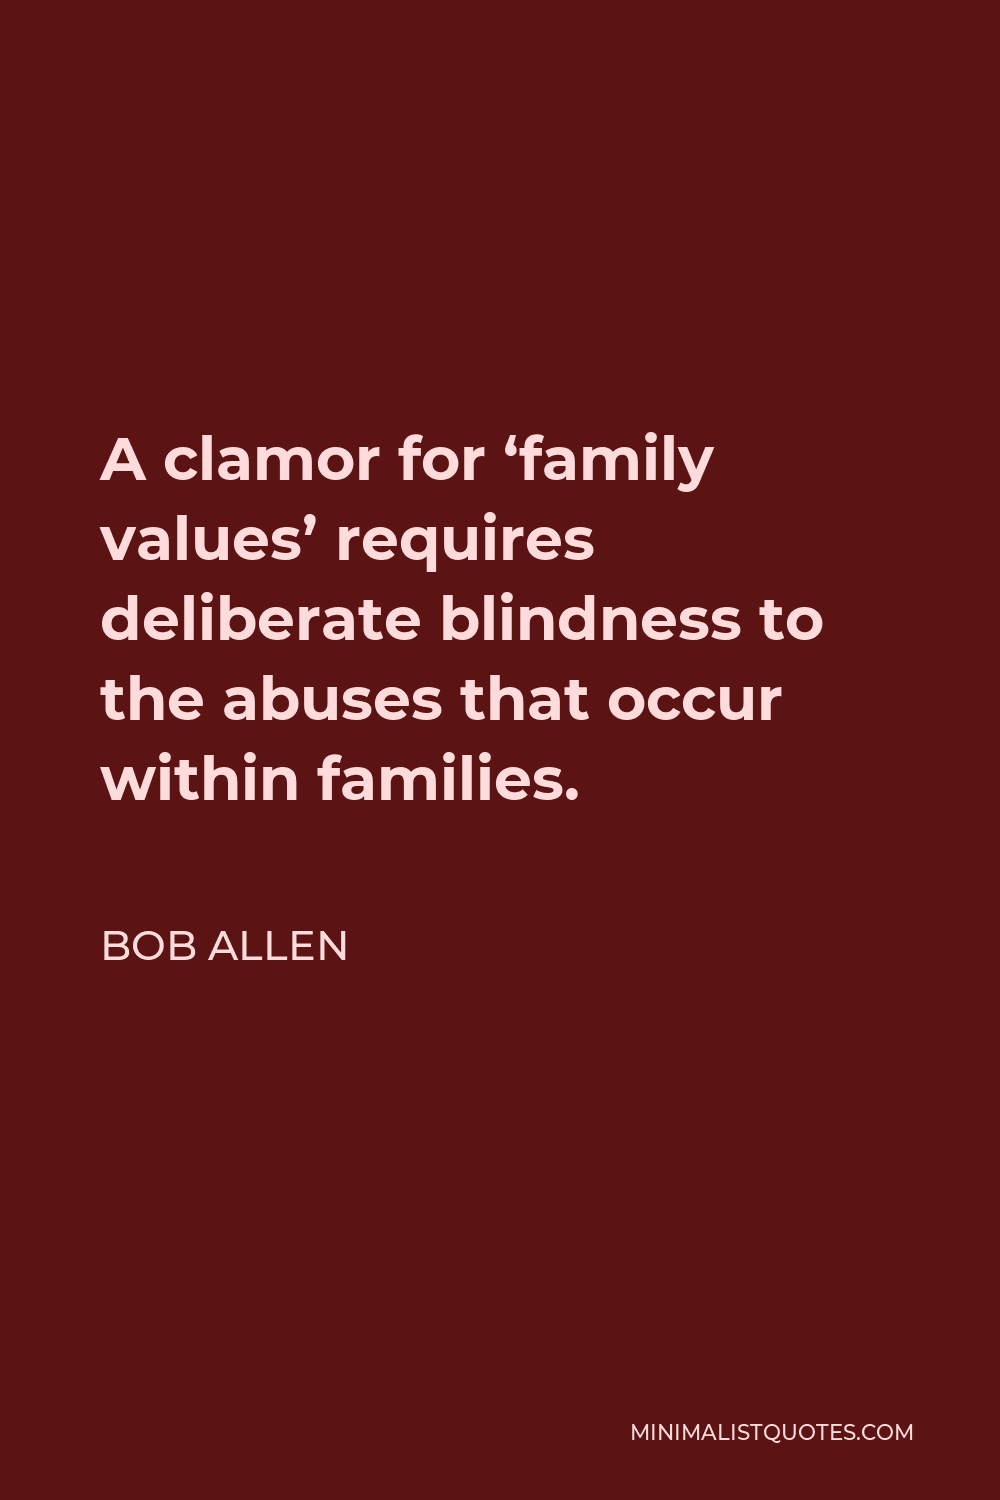 Bob Allen Quote - A clamor for ‘family values’ requires deliberate blindness to the abuses that occur within families.